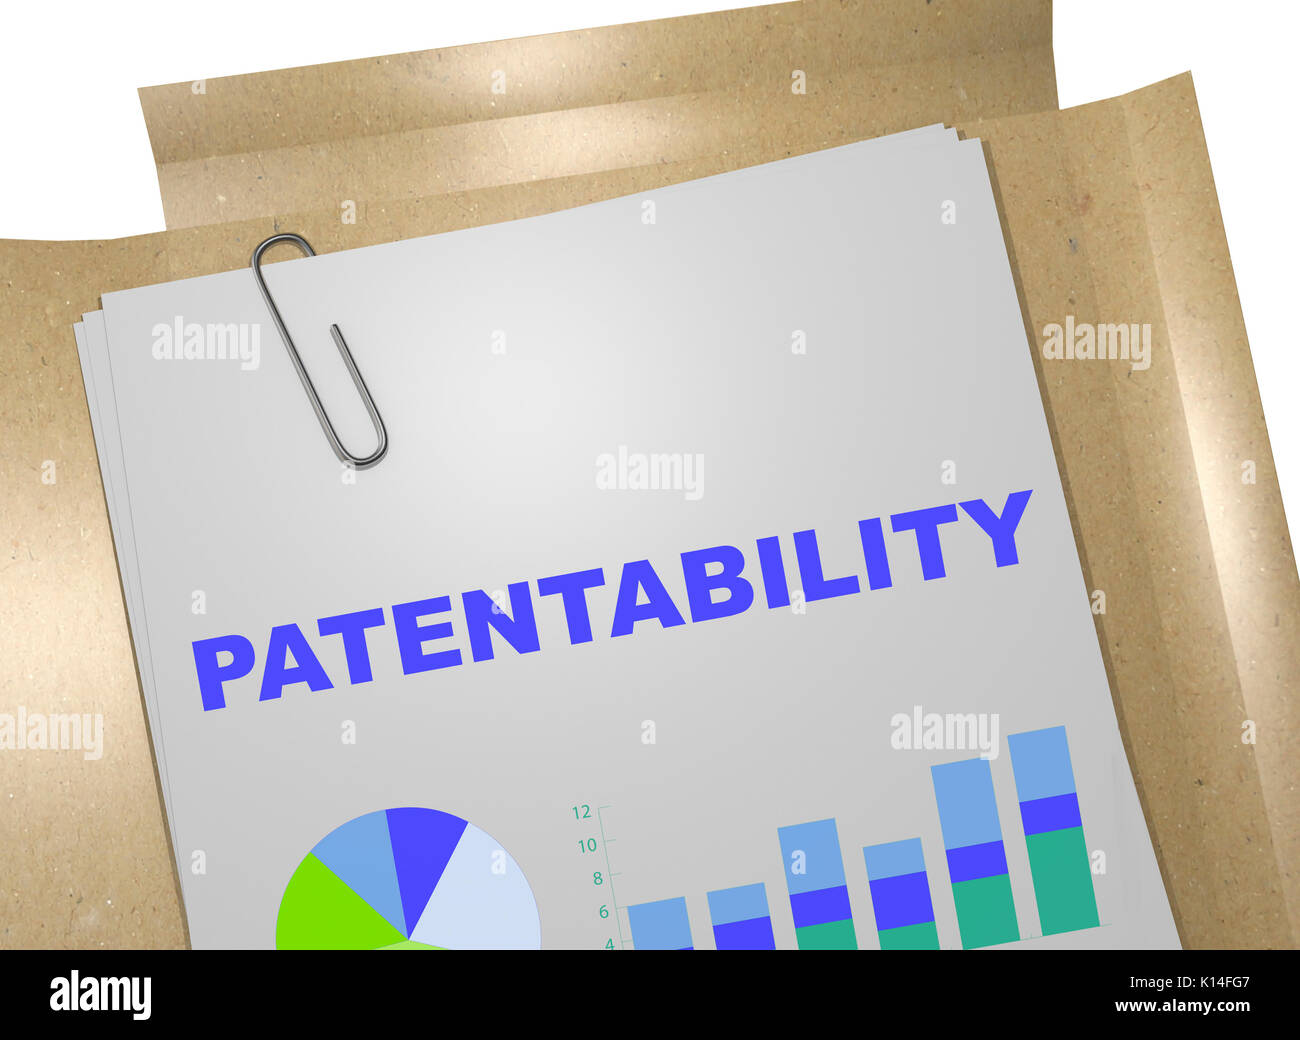 3D illustration of 'PATENTABILITY' title on business document Stock Photo